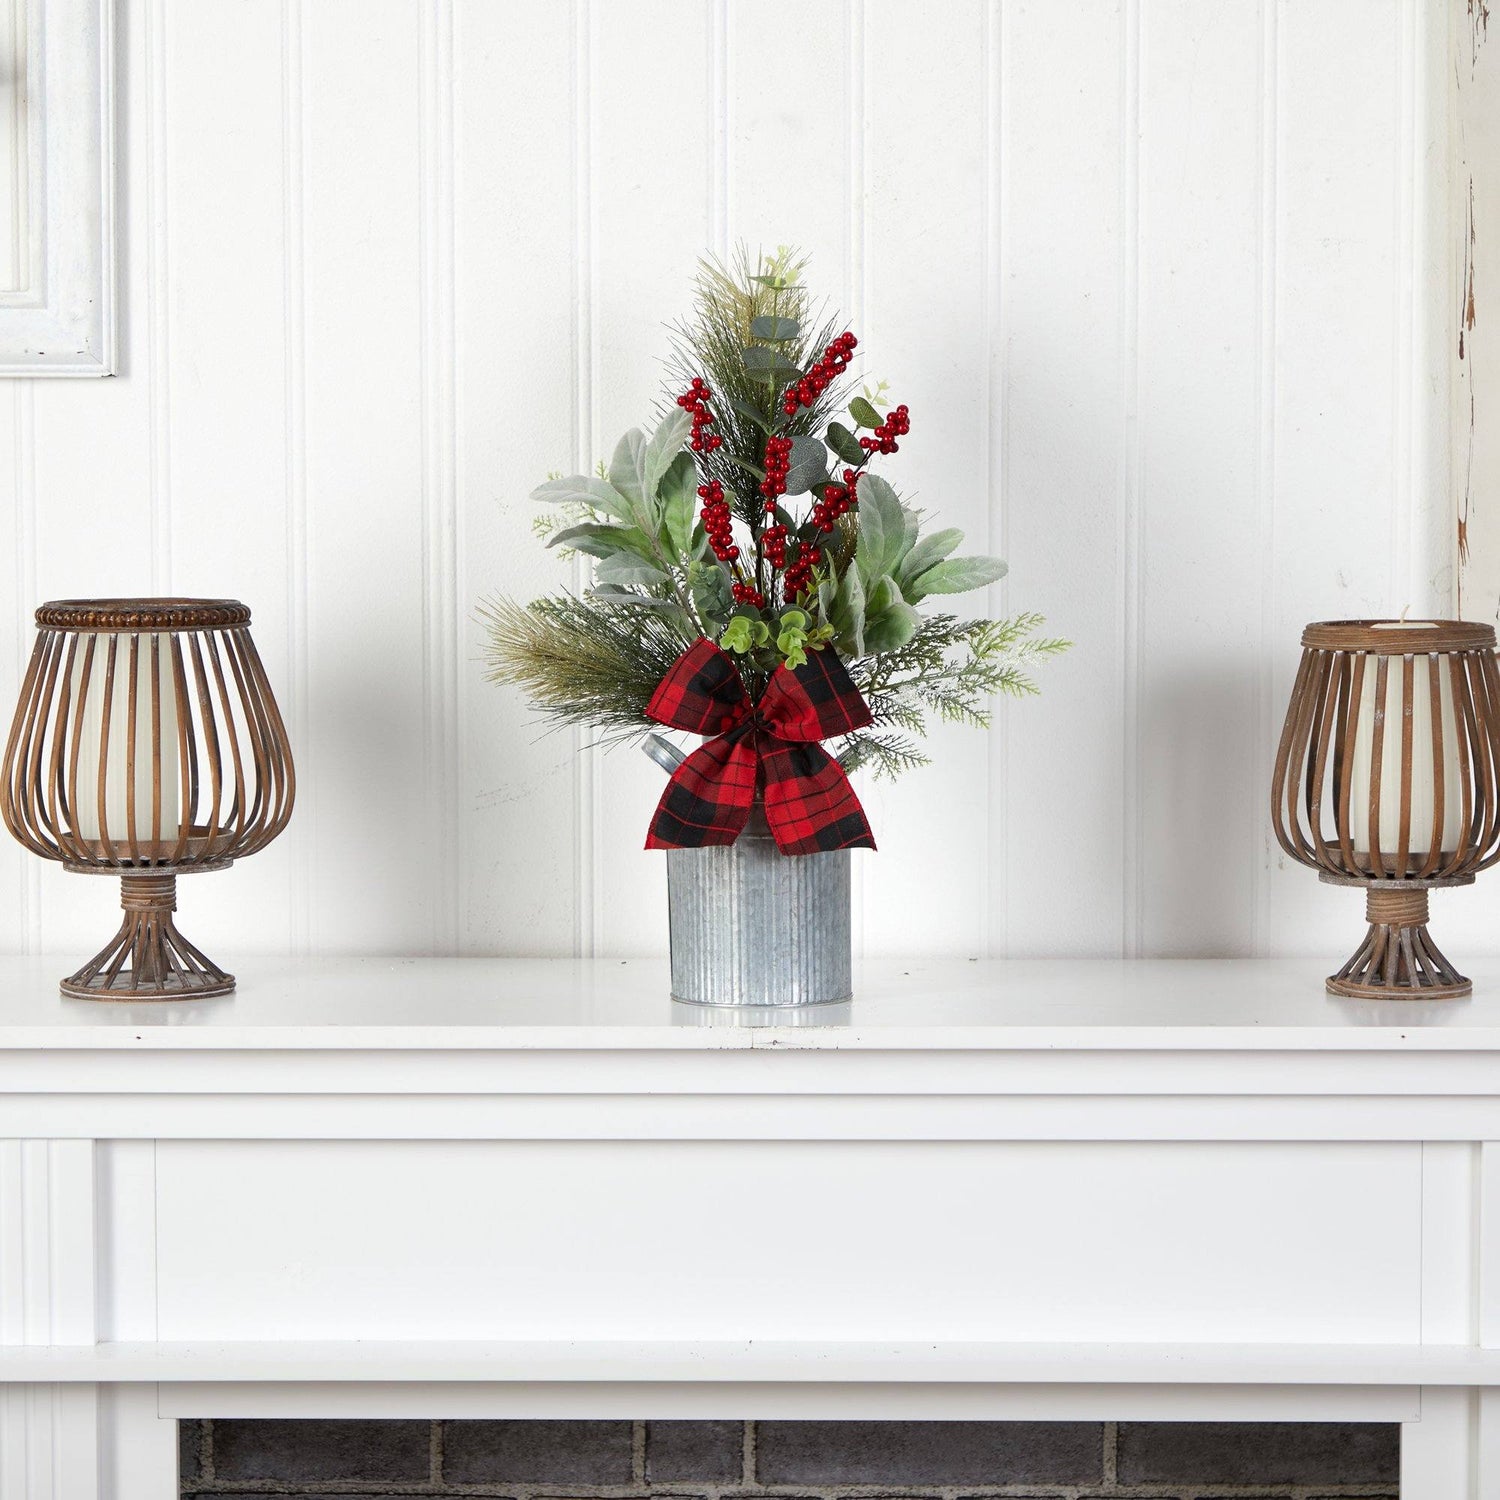 20" Holiday Winter Greenery, Pinecone and Berries with Buffalo Plaid Bow Christmas  Arrangement"